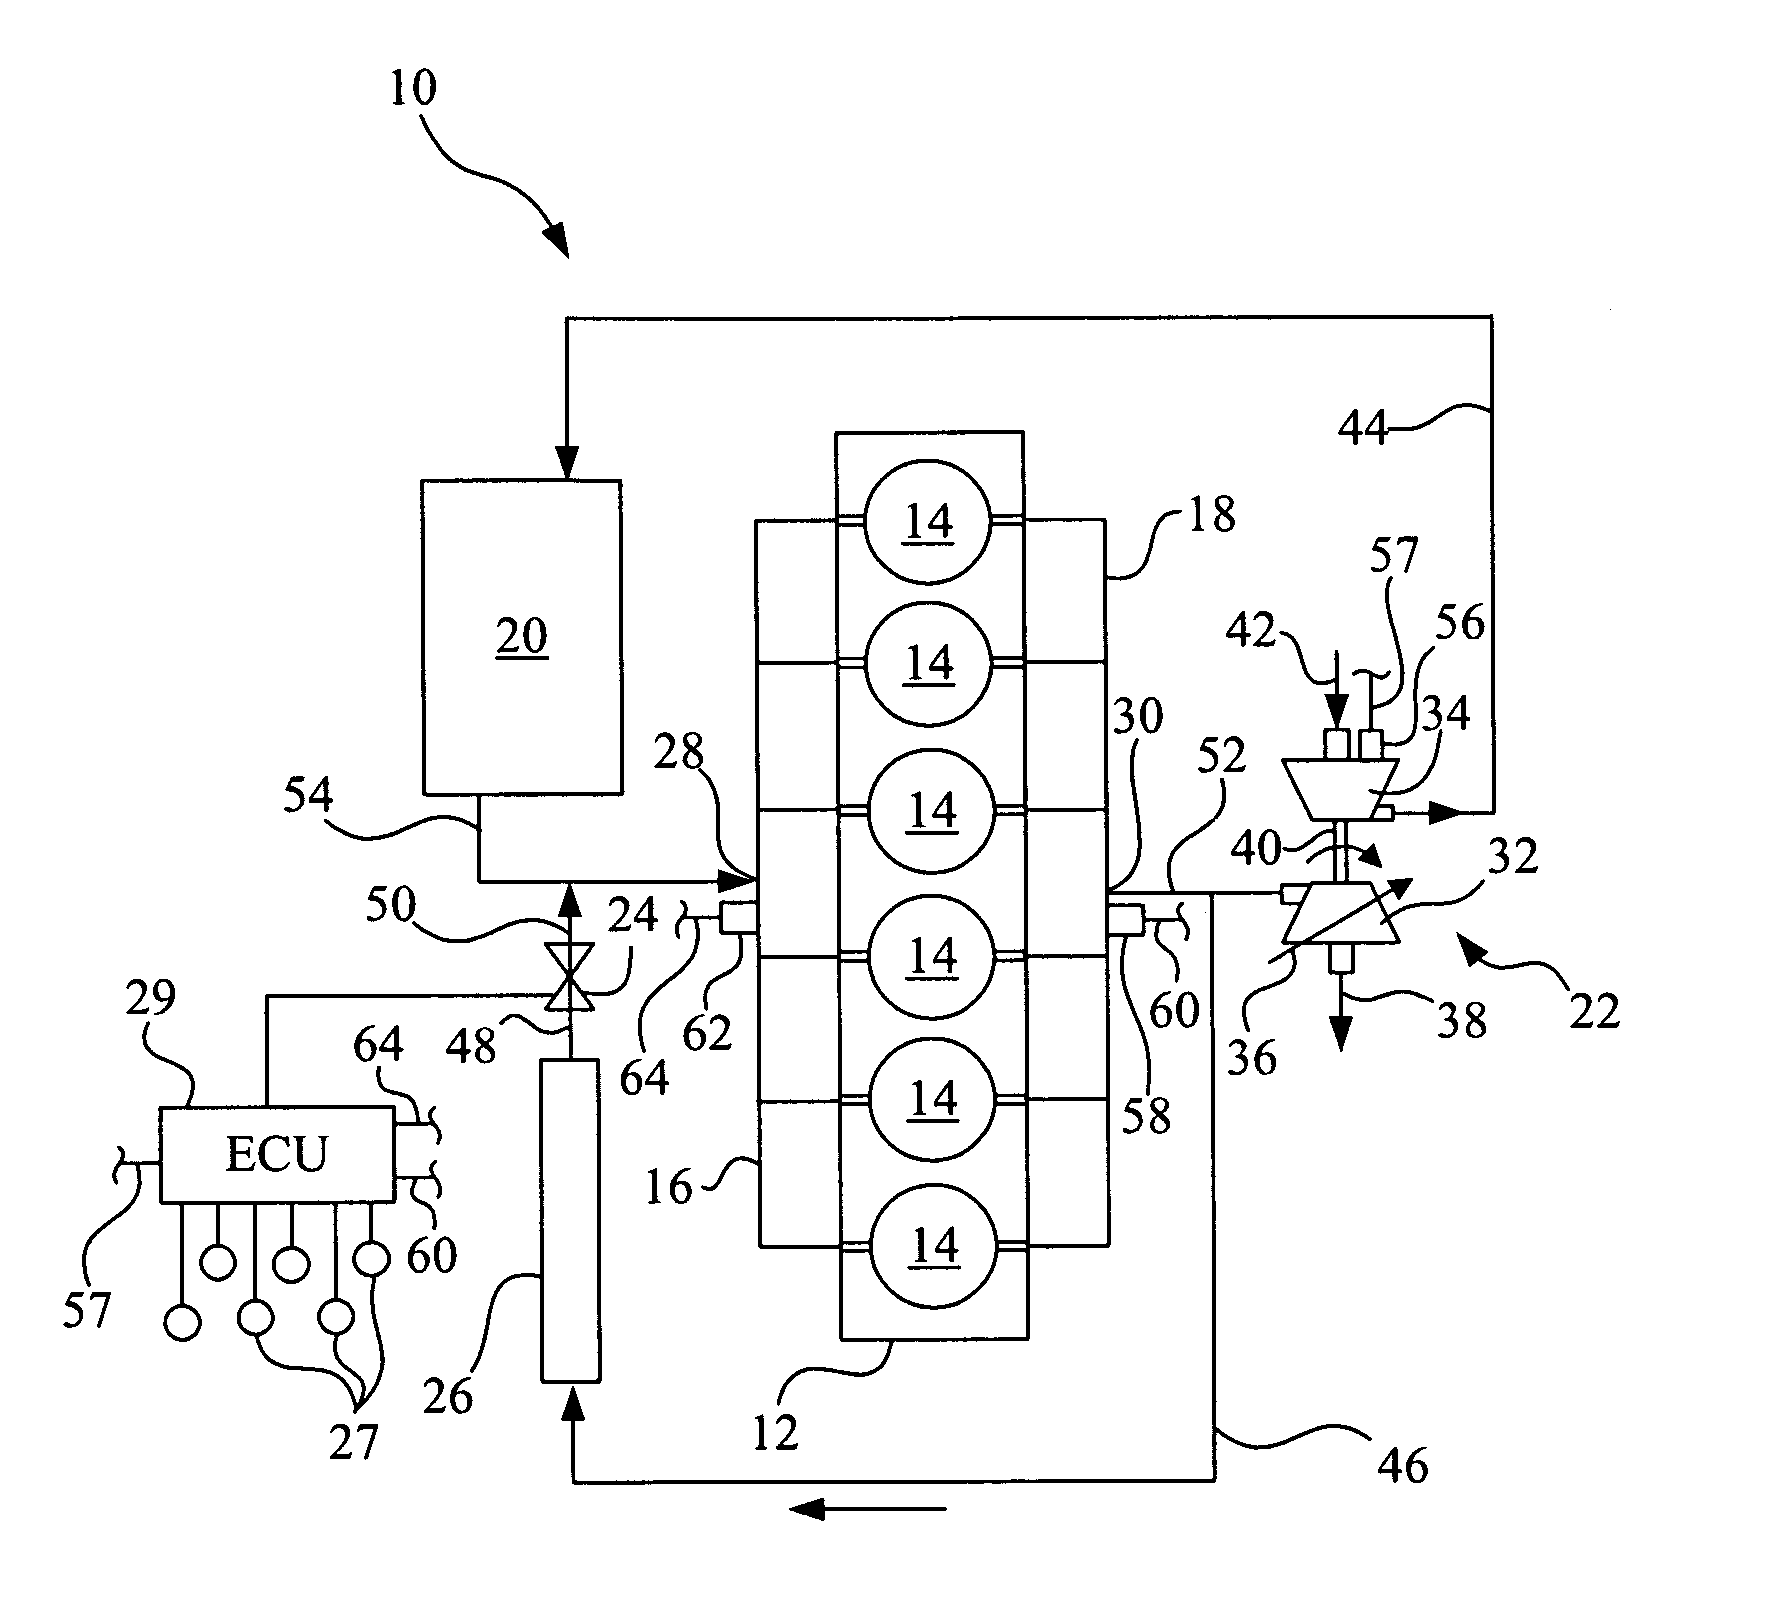 Internal combustion engine with turbocharger surge detection and control